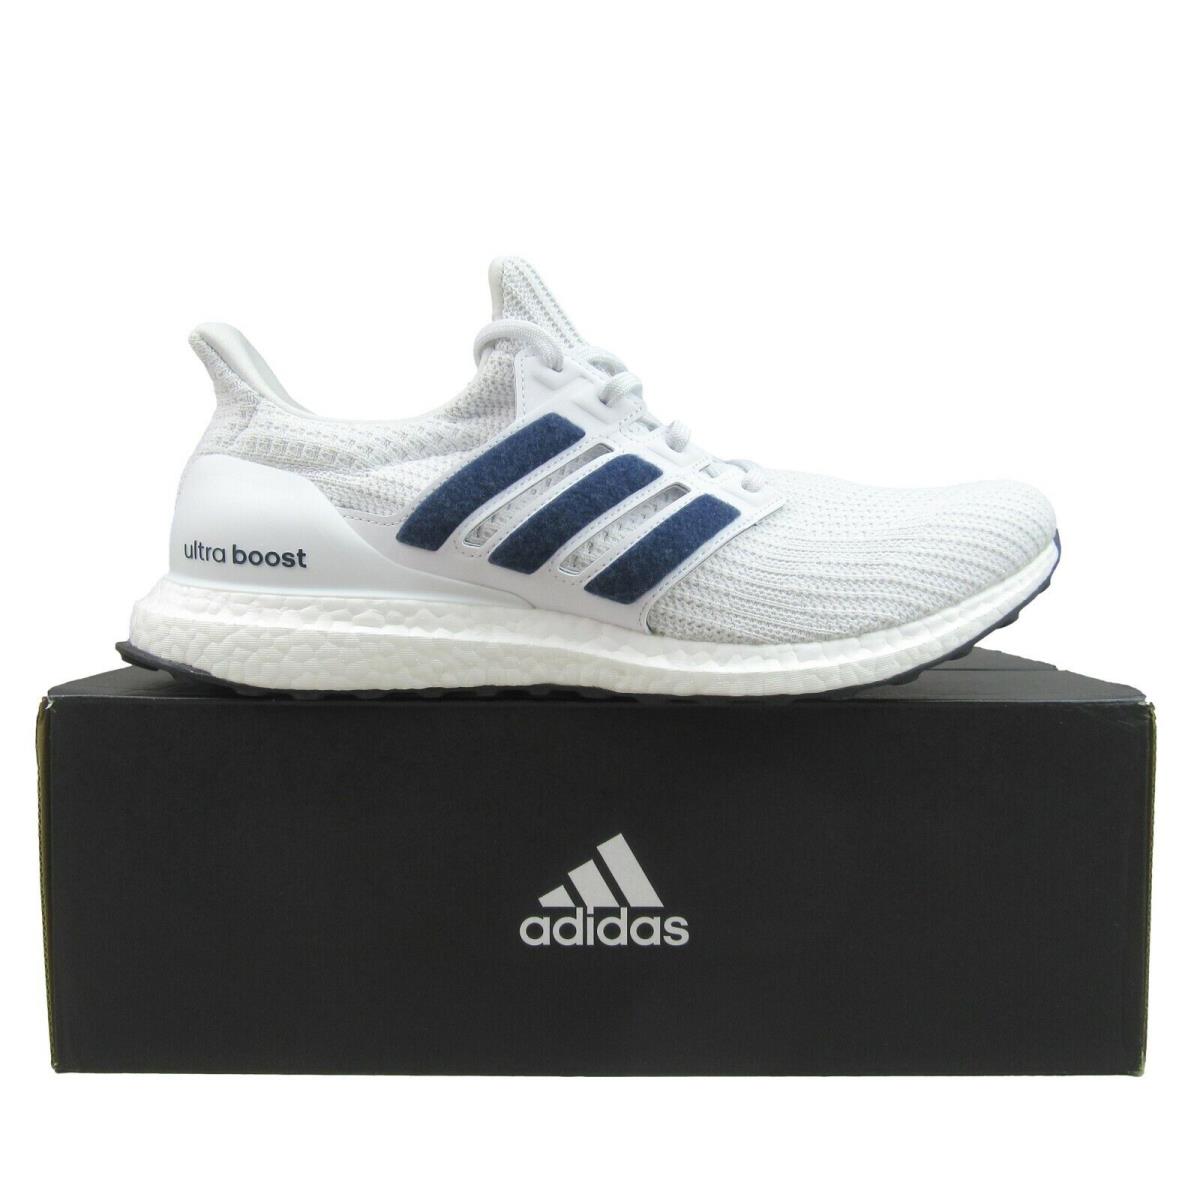 Adidas Ultraboost 4.0 Dna Running Shoes Mens Size 12 Navy White FY9337